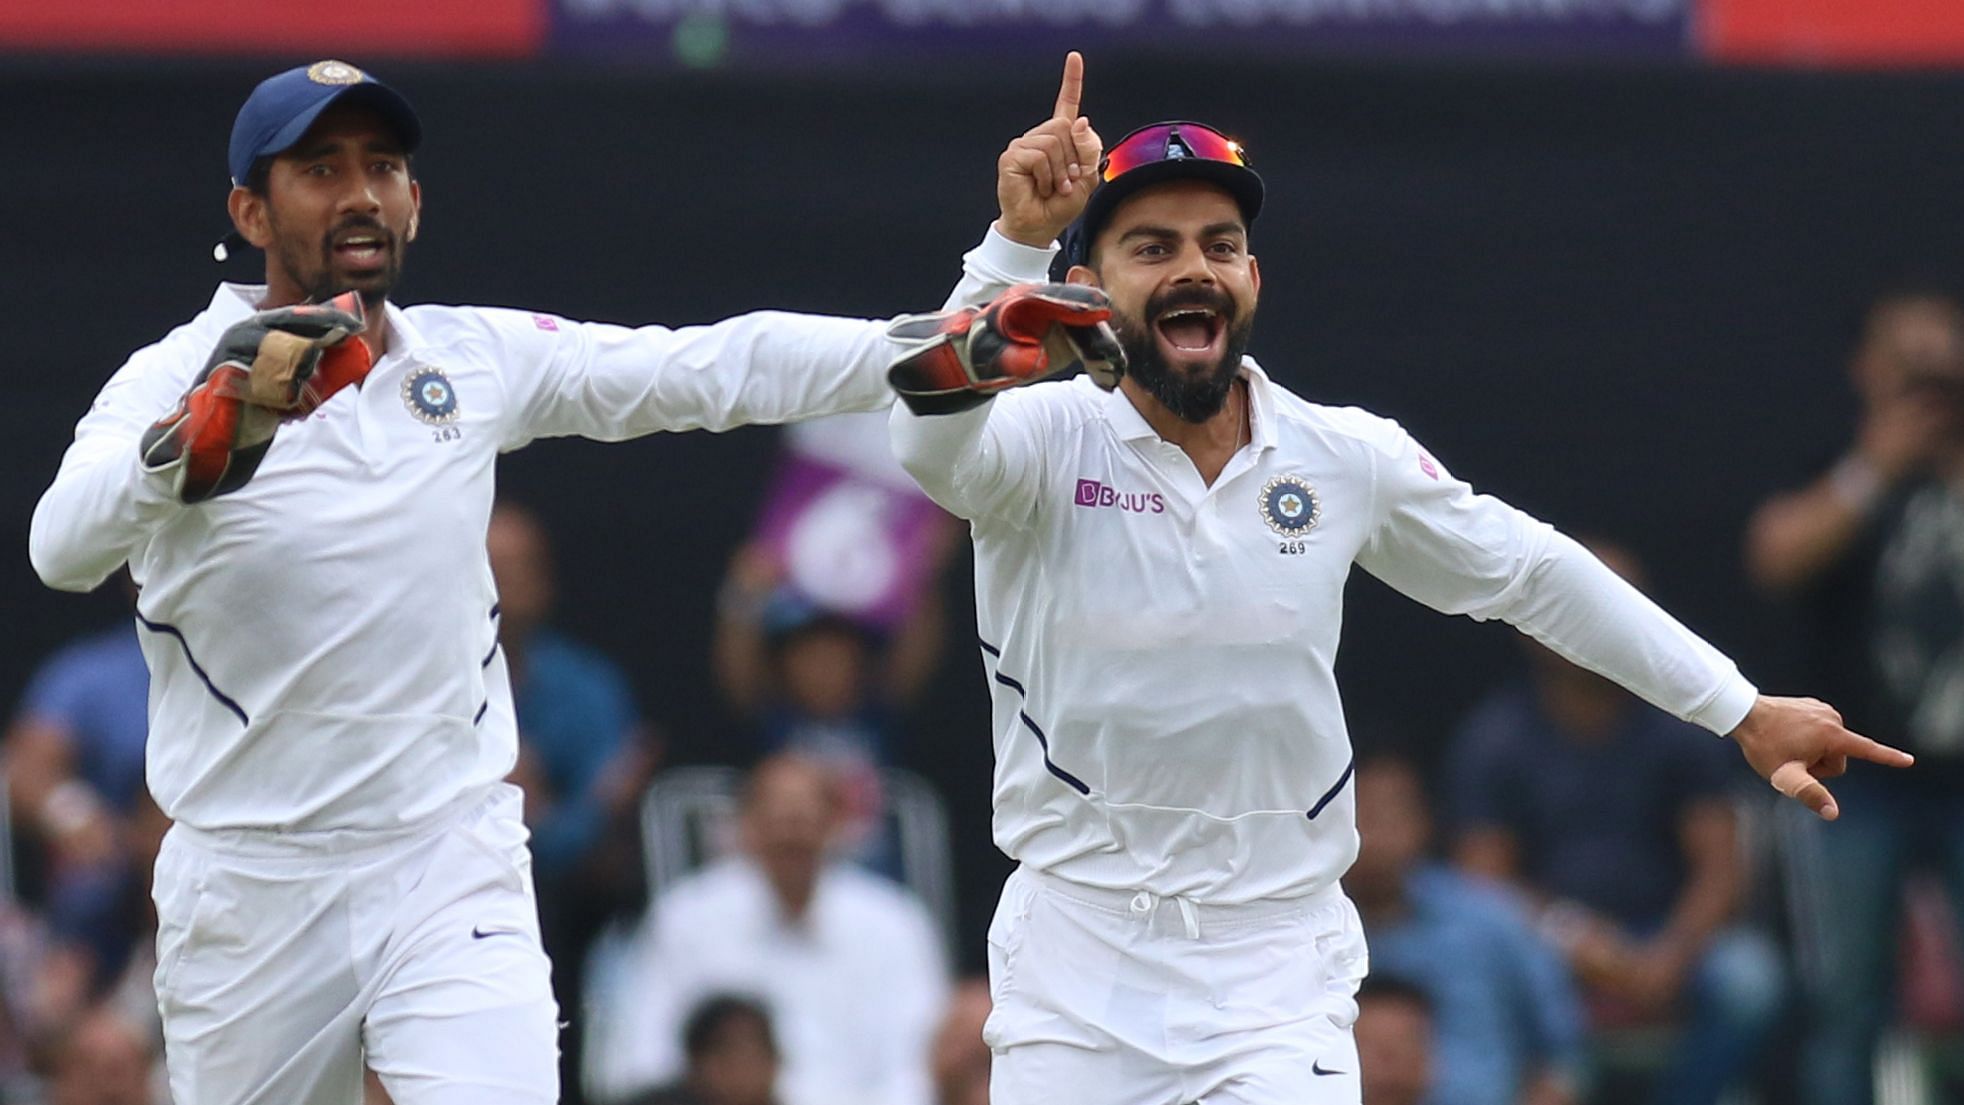 Latest updates from Day 2 of the India vs South Africa third Test.